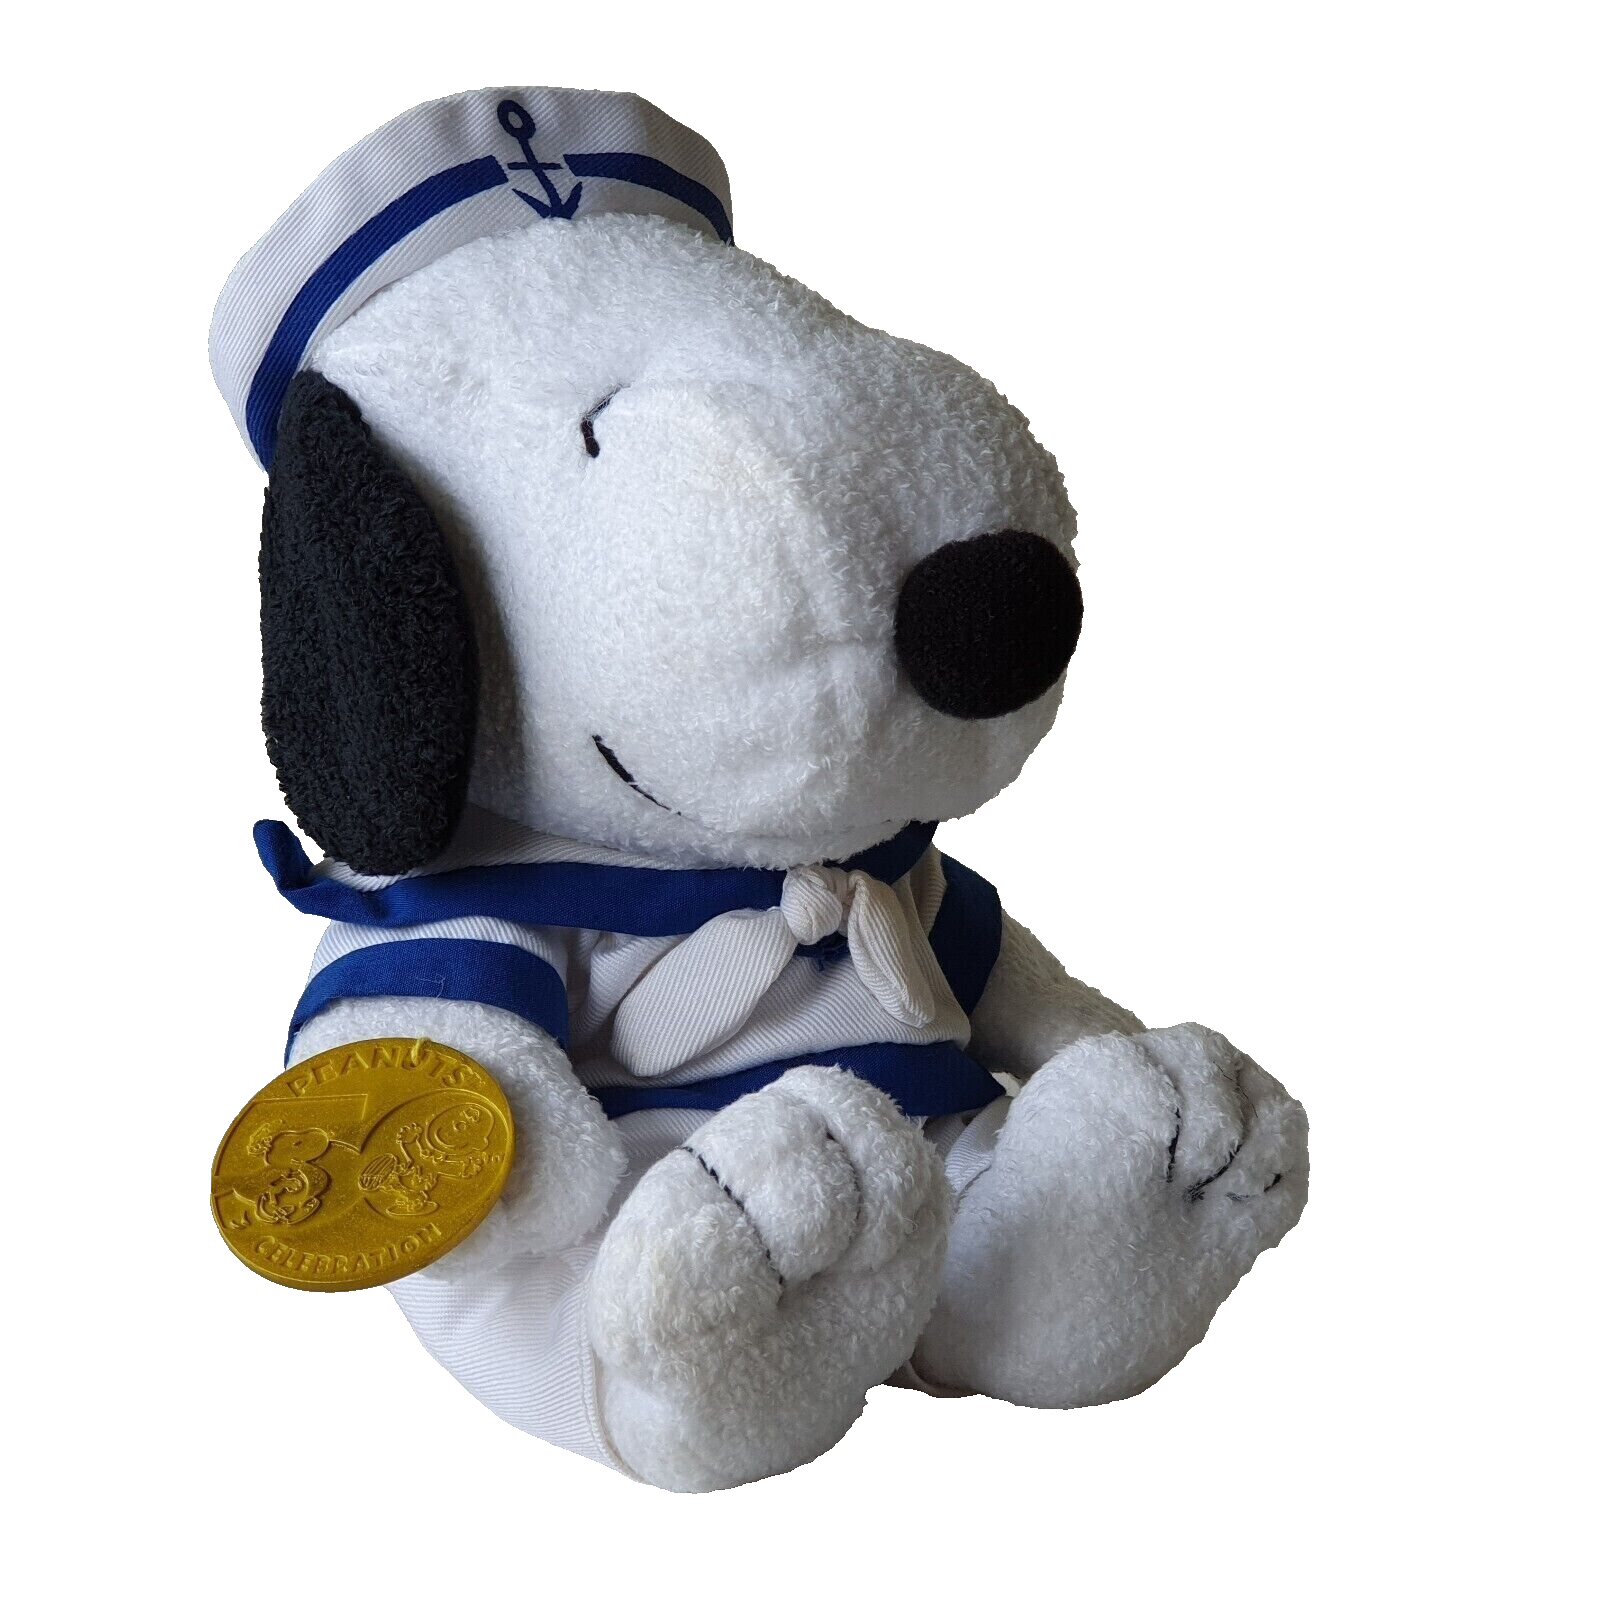 Primary image for 2000 Rare Sailor Snoopy Plush Doll x McDonald's Happy Meal